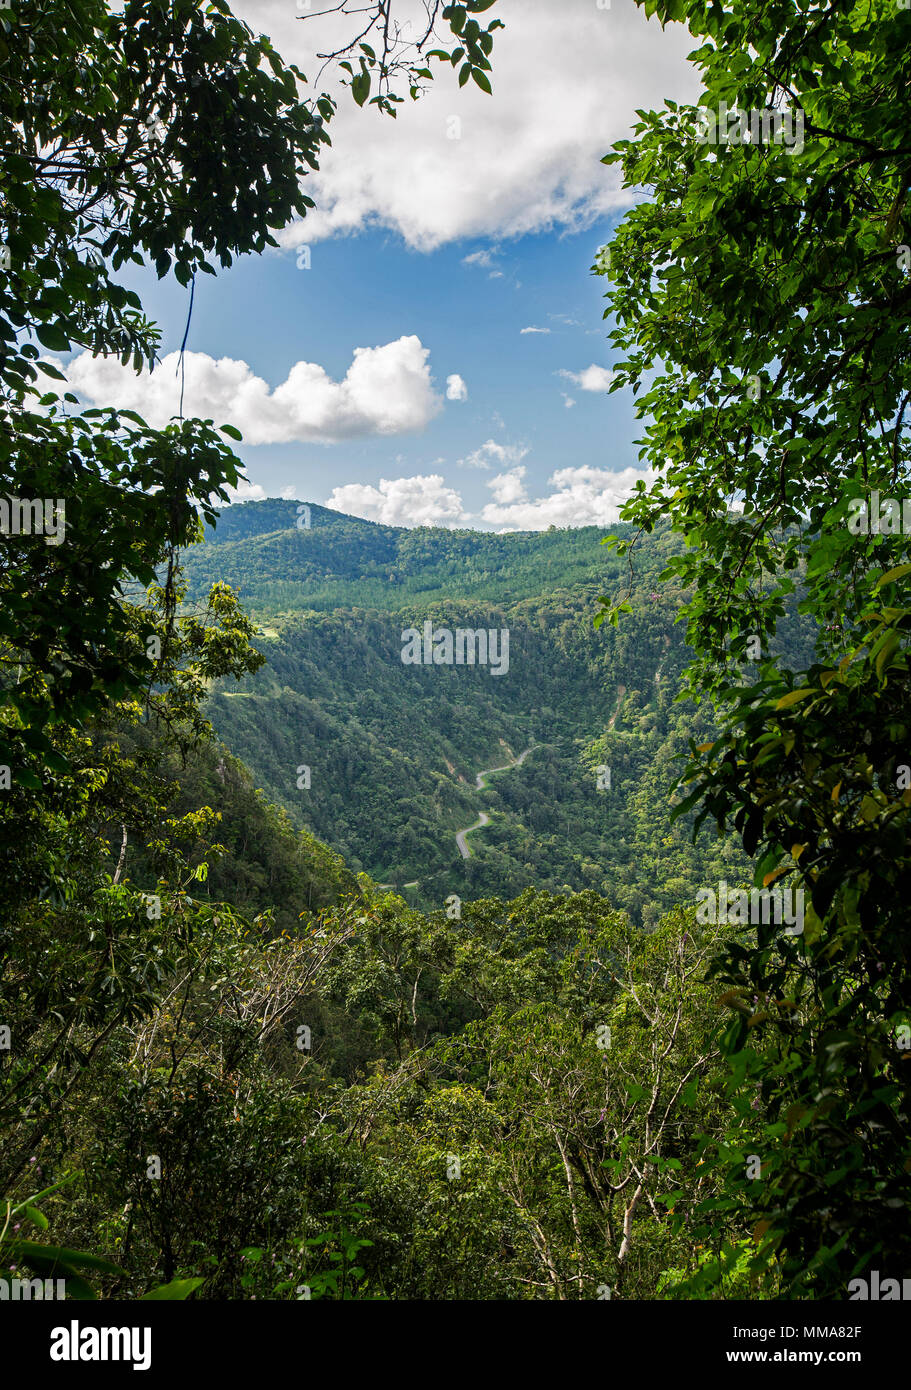 Landscape of steep hills cloaked in forests with road snaking through ranges and Eungalla National Park in northern Queensland, Australia Stock Photo